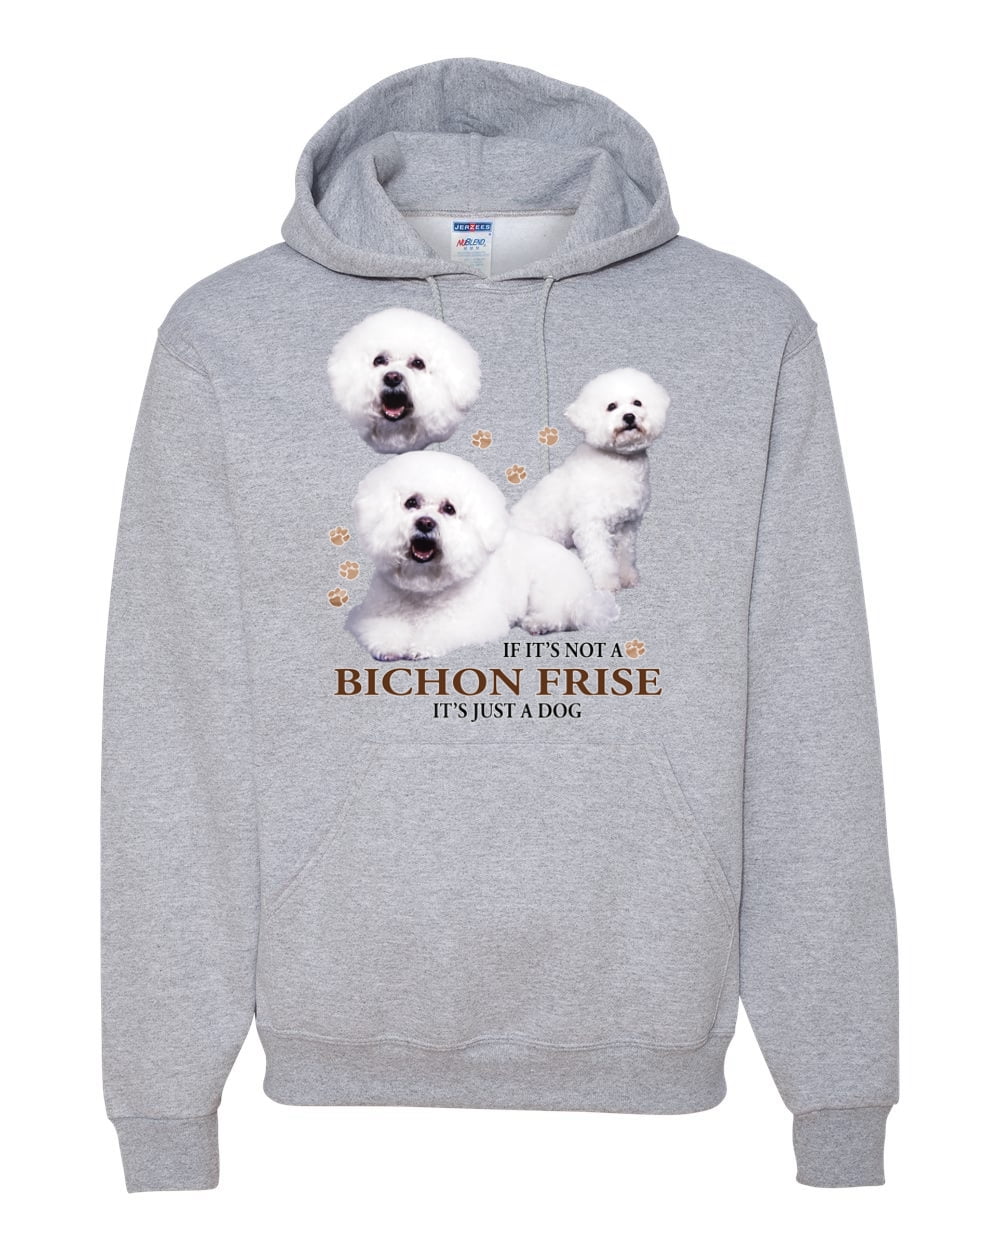 The Best Therapy is Bichon Fris‚ Dog Funny Gifts for Pet Lover Sweatshirt 